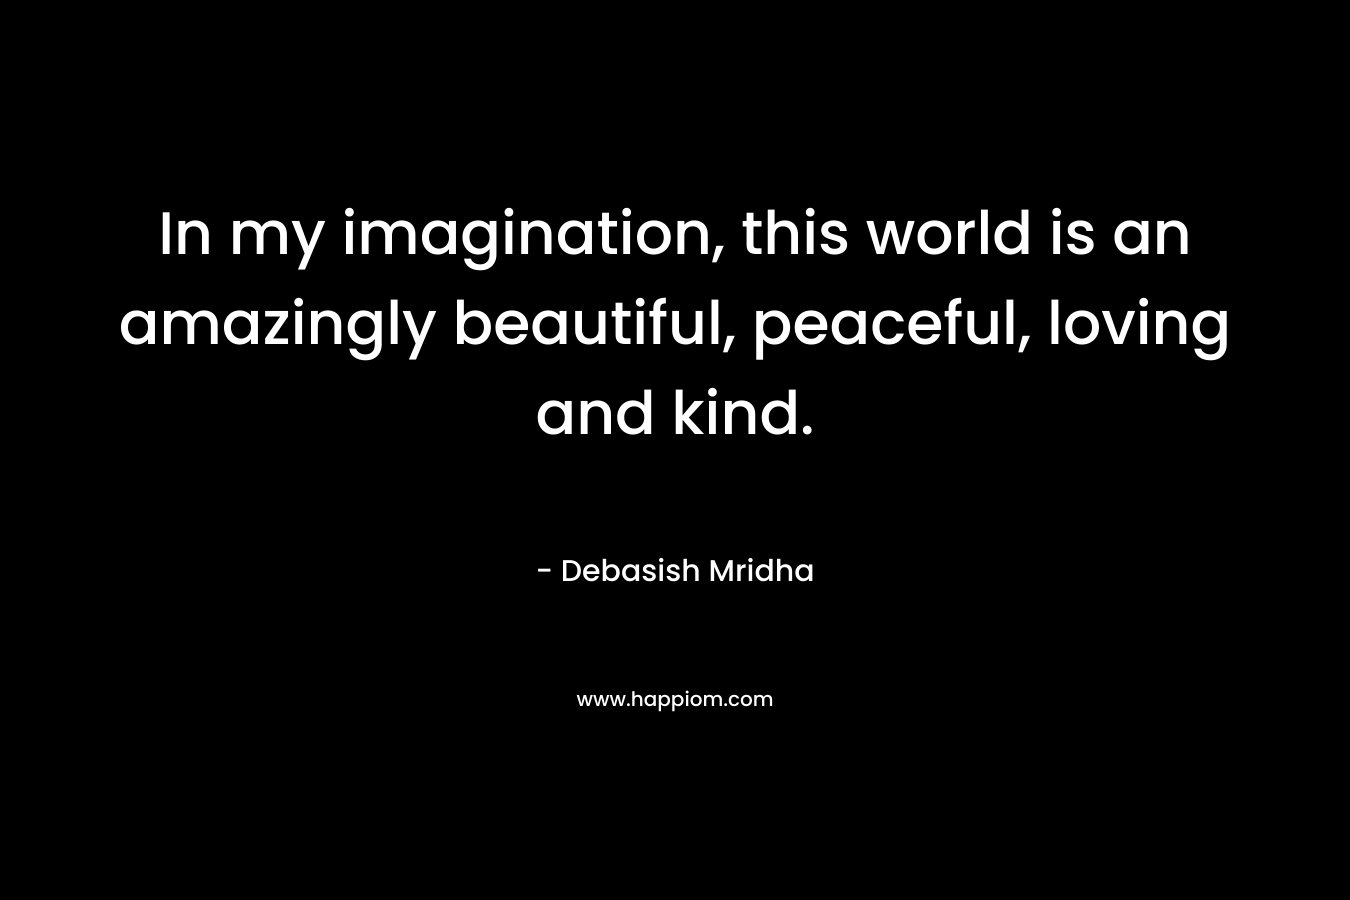 In my imagination, this world is an amazingly beautiful, peaceful, loving and kind.